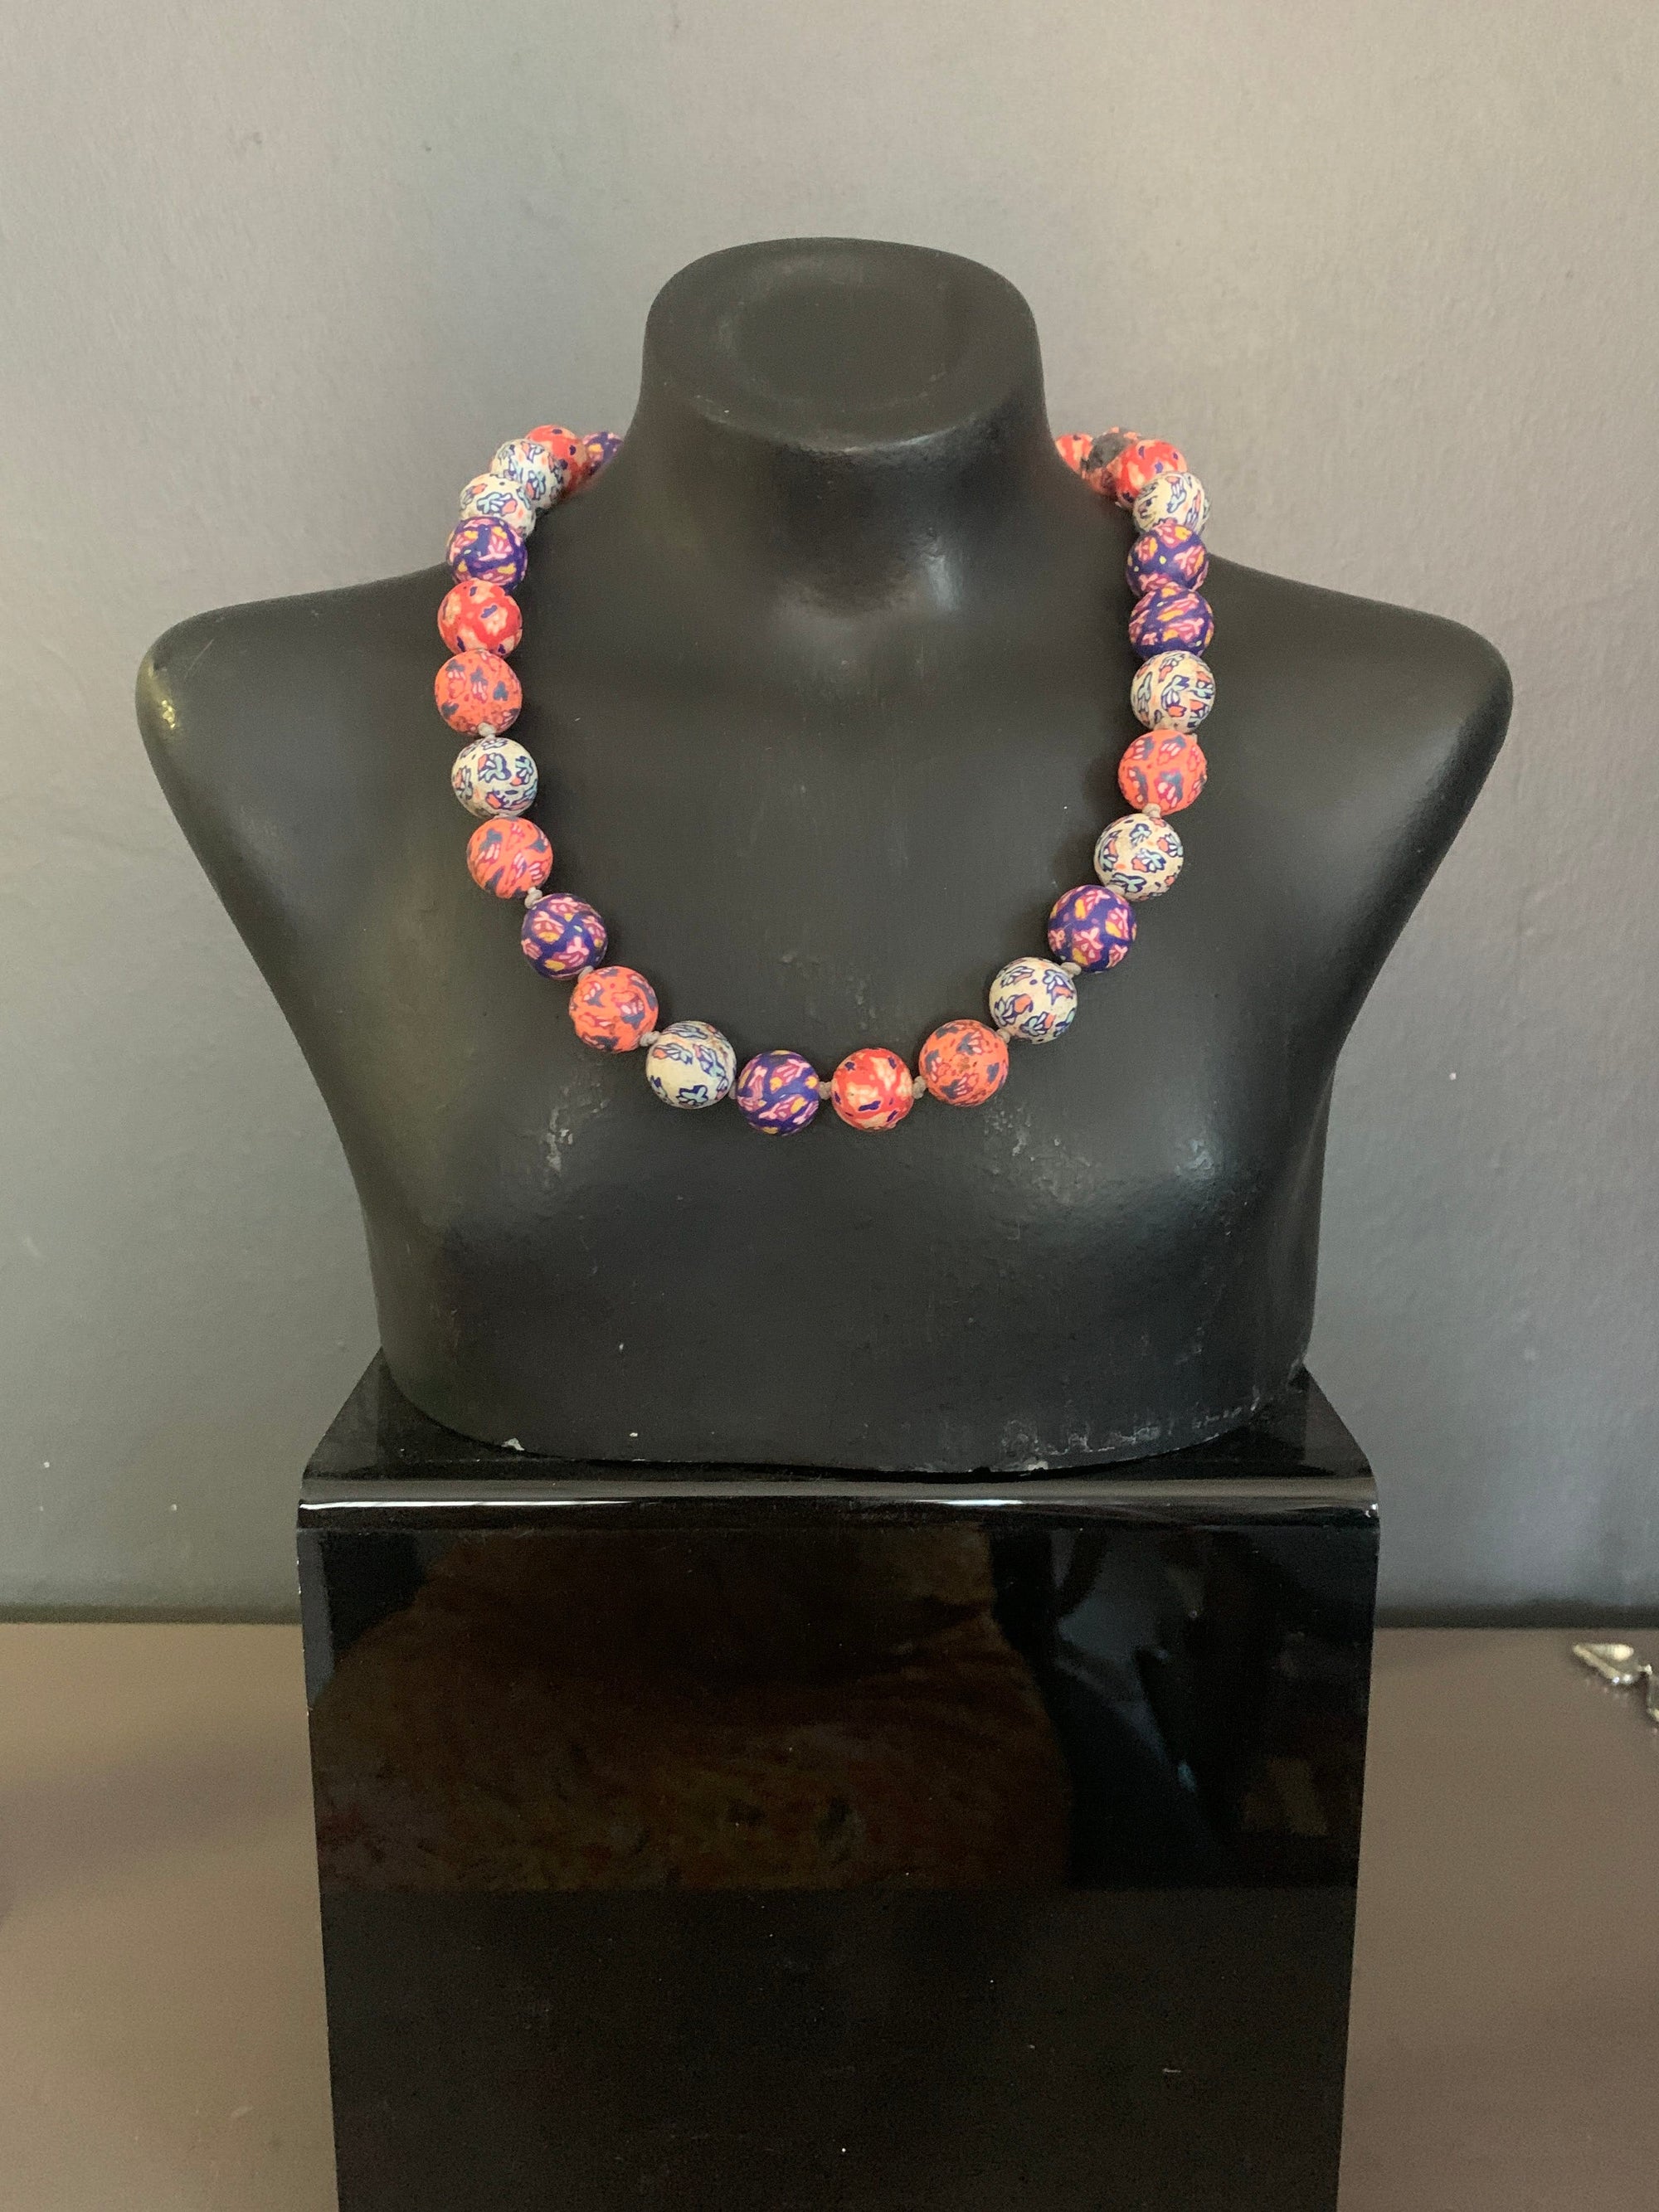 Whimsical Pink Necklace - 2ndhandwarehouse.com